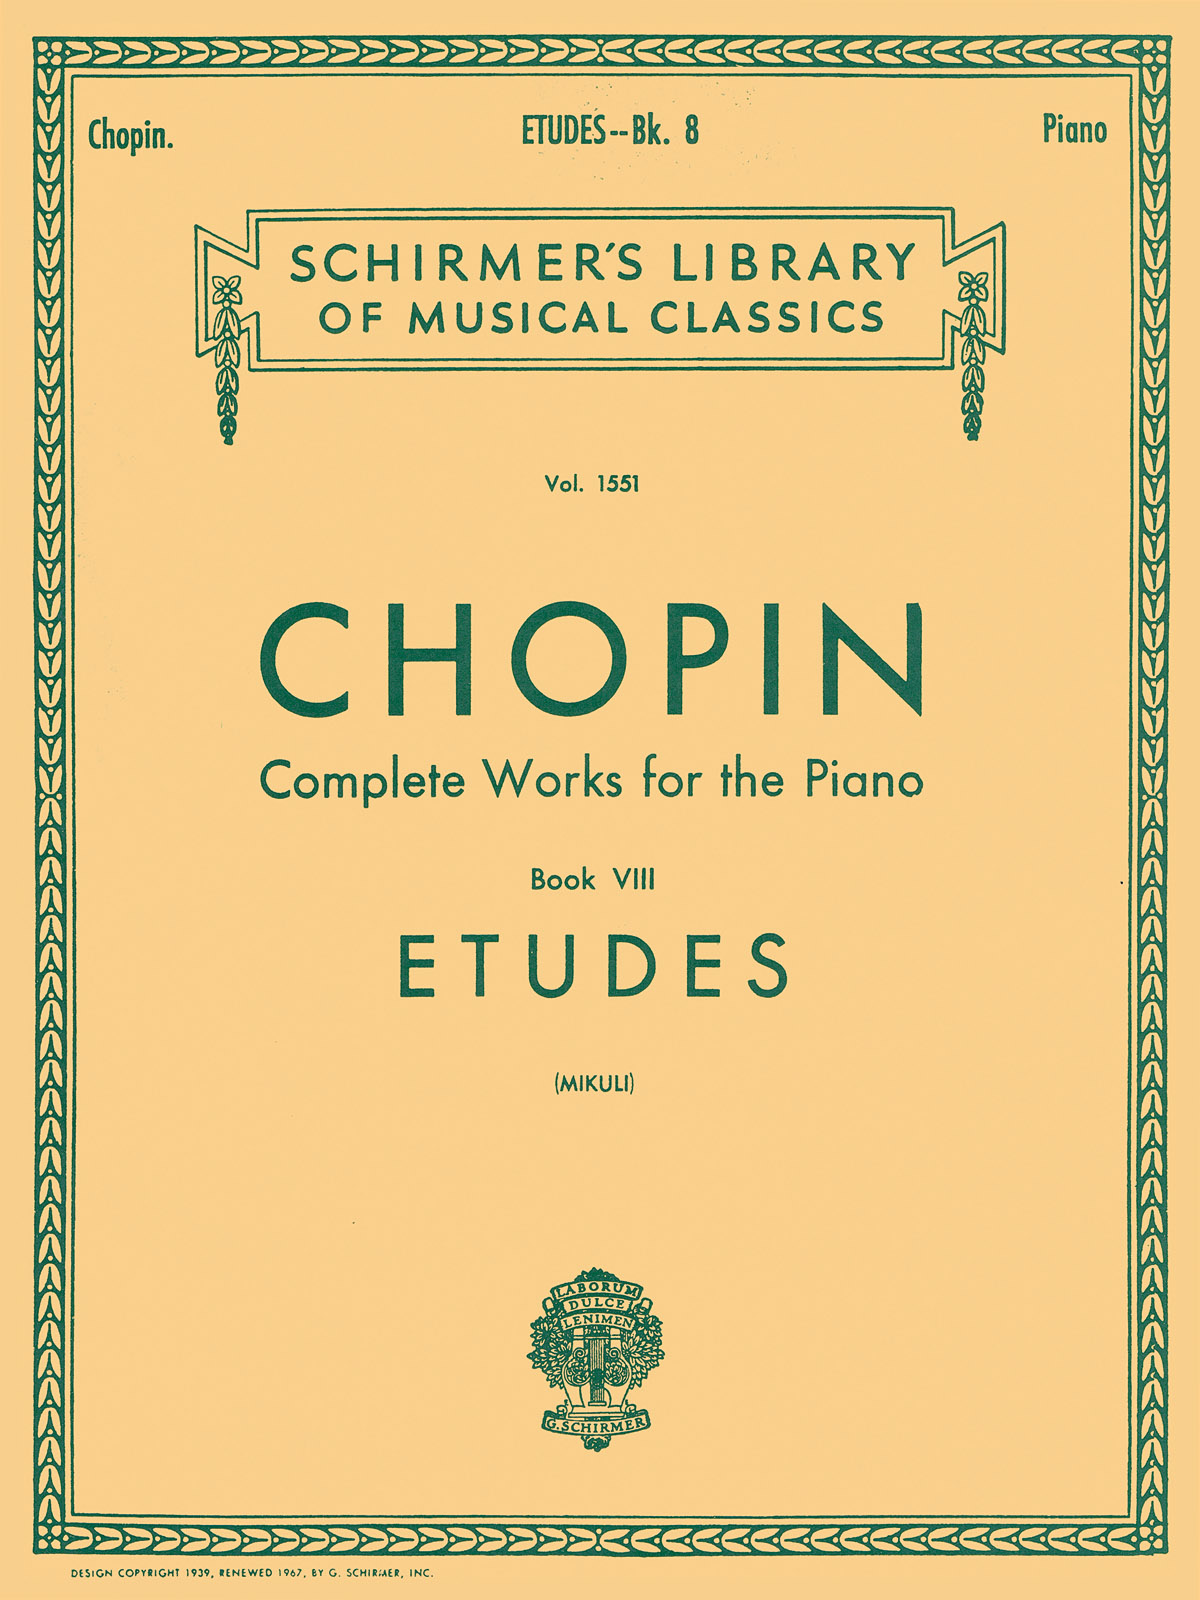 Complete Works For The Piano Book VIII Etudes - Complete Works For The Piano Book VIII